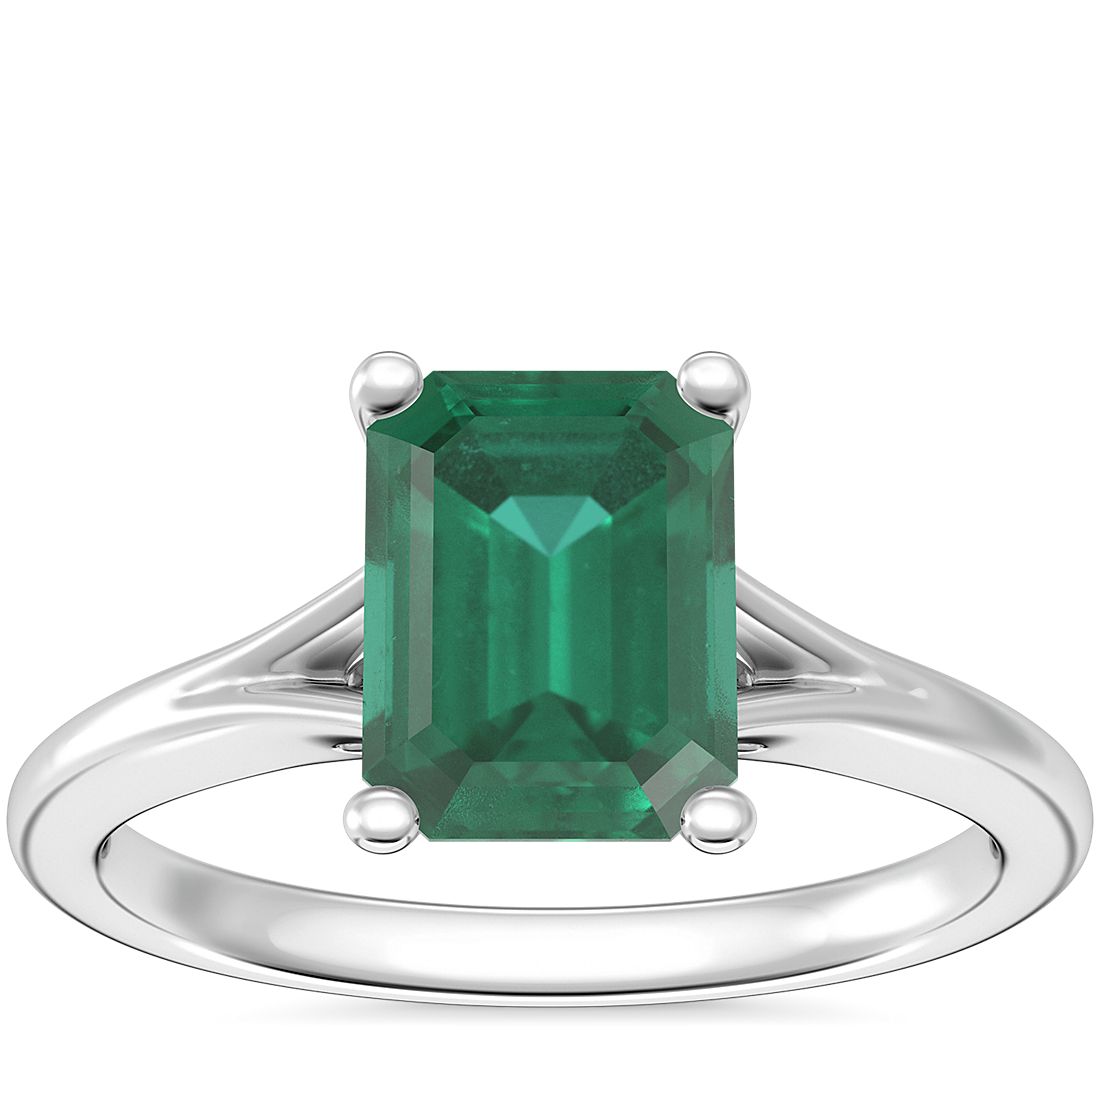 Petite Split Shank Solitaire Engagement Ring with Emerald-Cut Emerald in 14k White Gold (8x6mm)